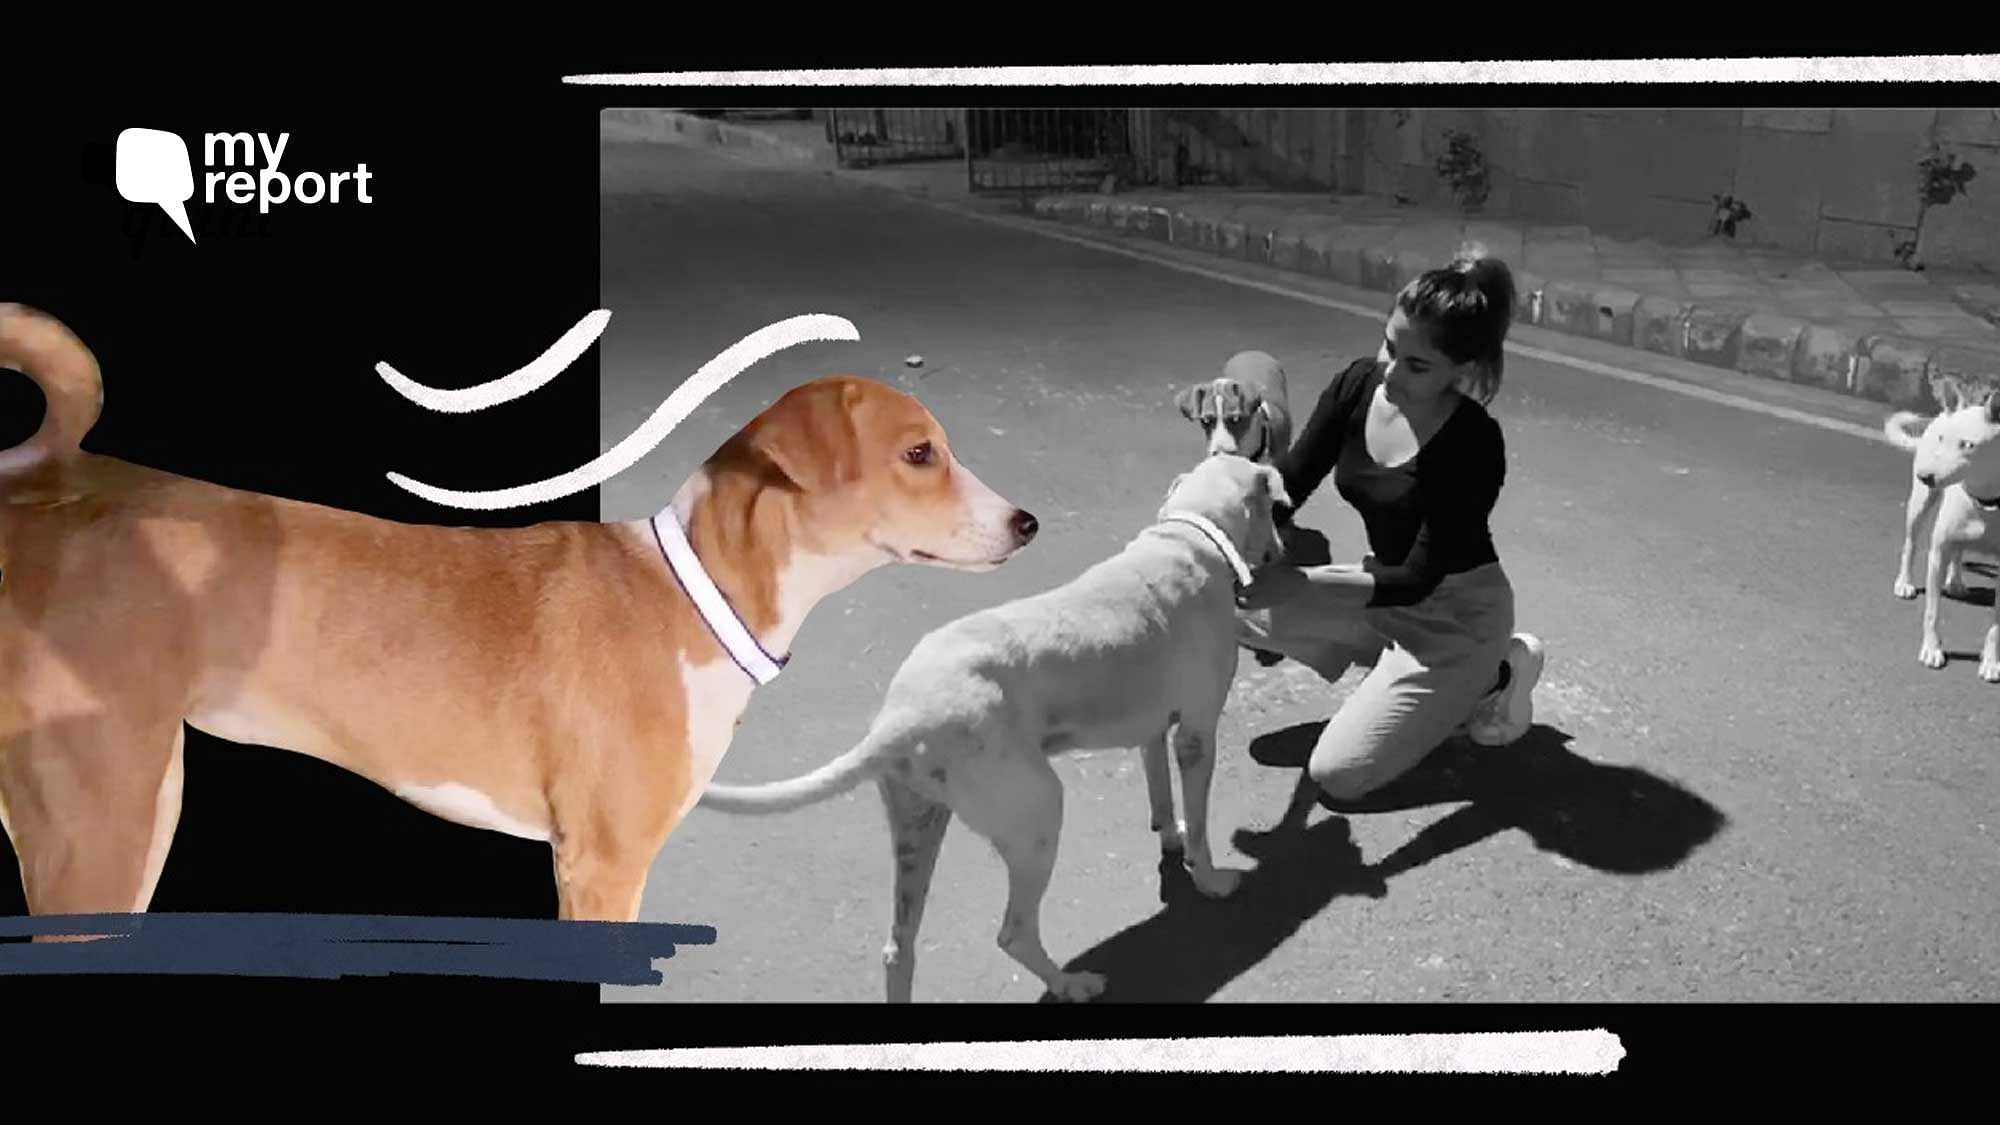 Vibha Tomar has tied over 1,000 reflective collars around the neck of stray animals.